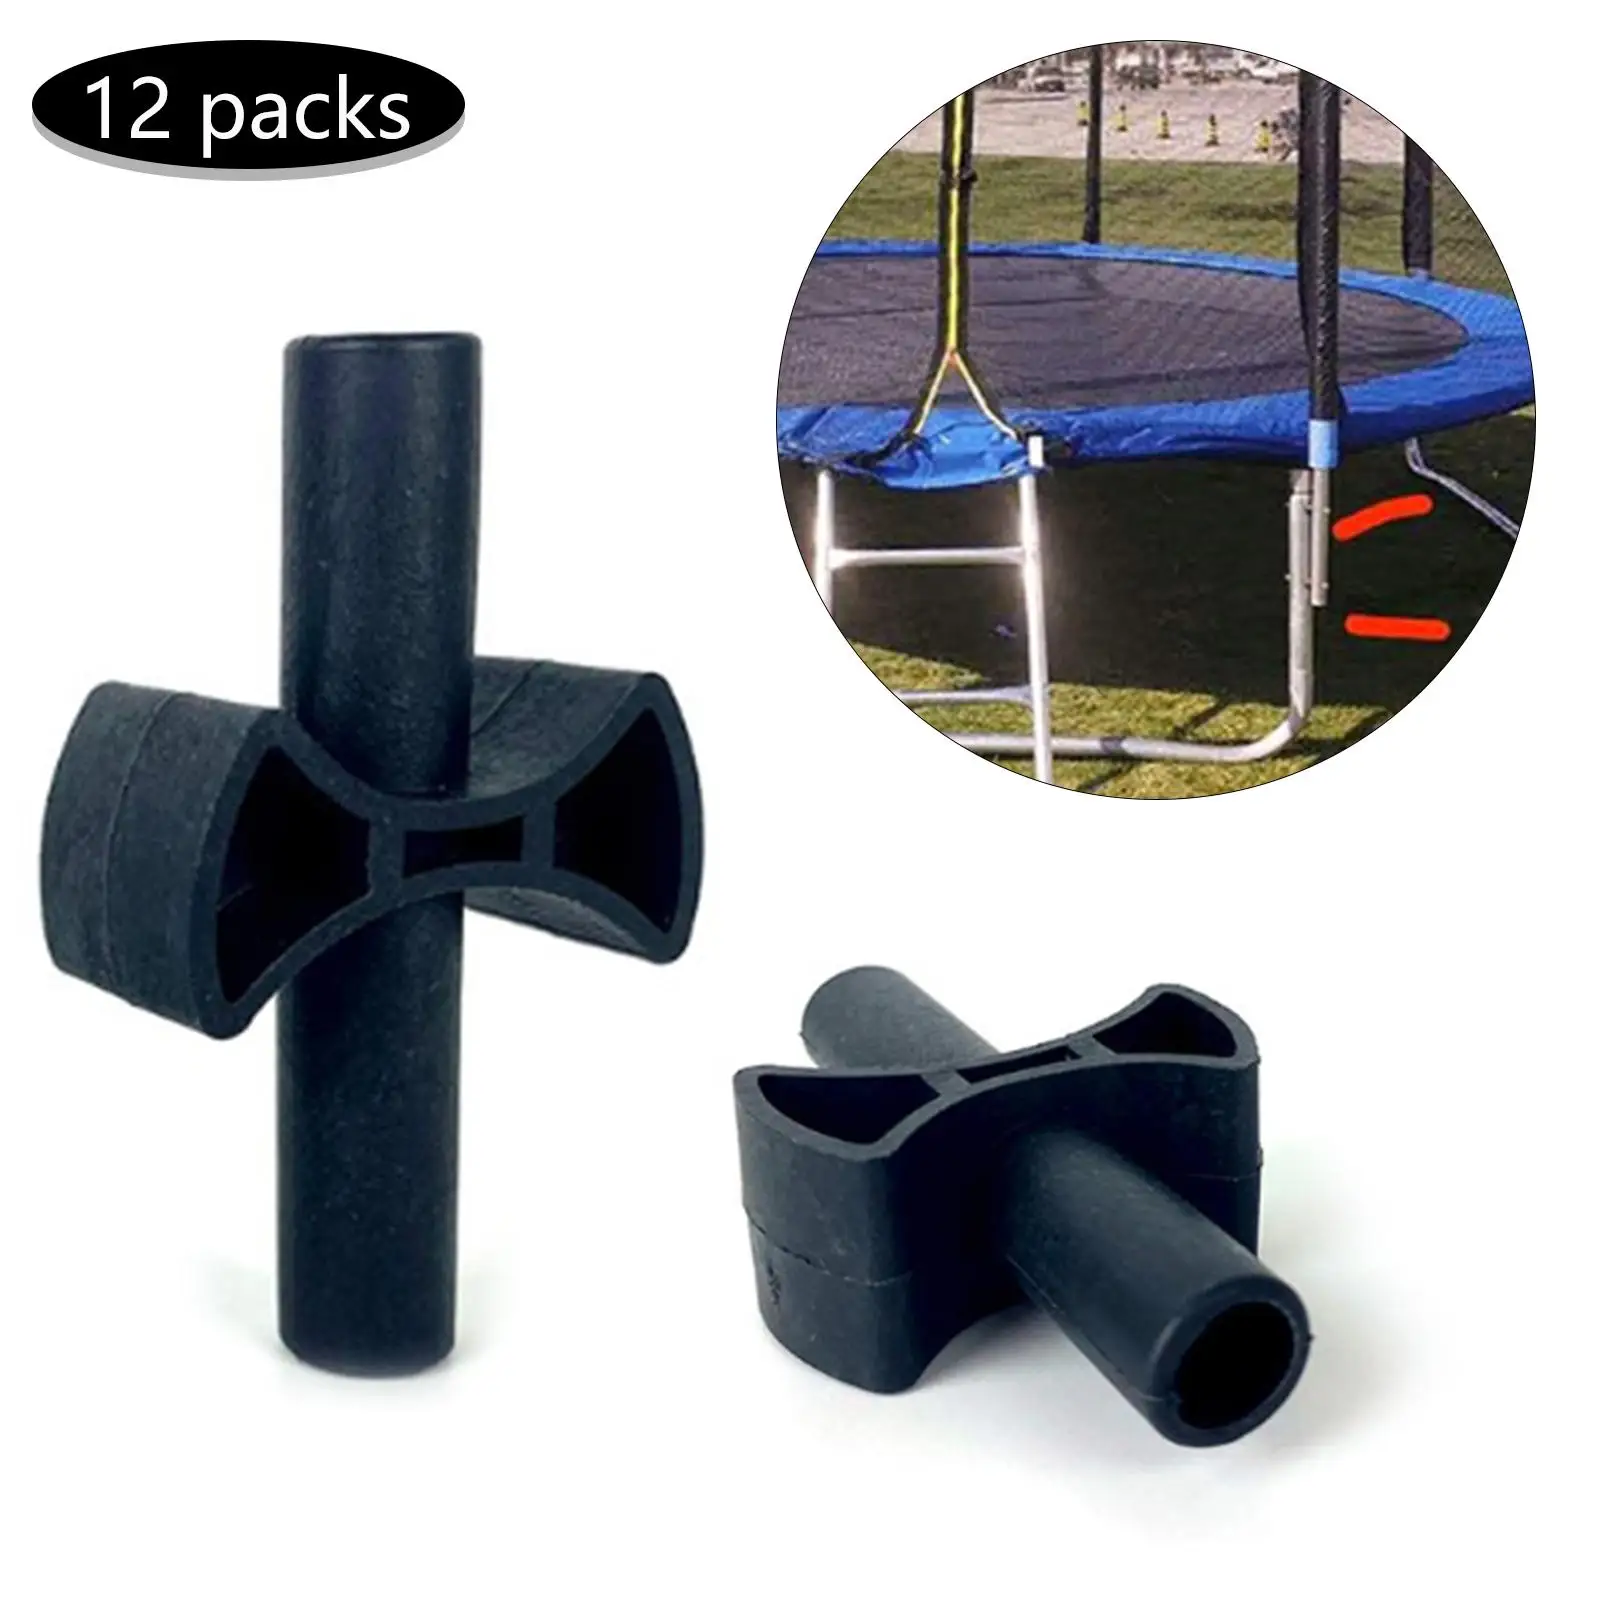 Trampoline Anchors Cross Mat Accessory Thick Cross Cushion Heavy Duty Hand Pull Tool Parts Accessories for Trampolines Parts